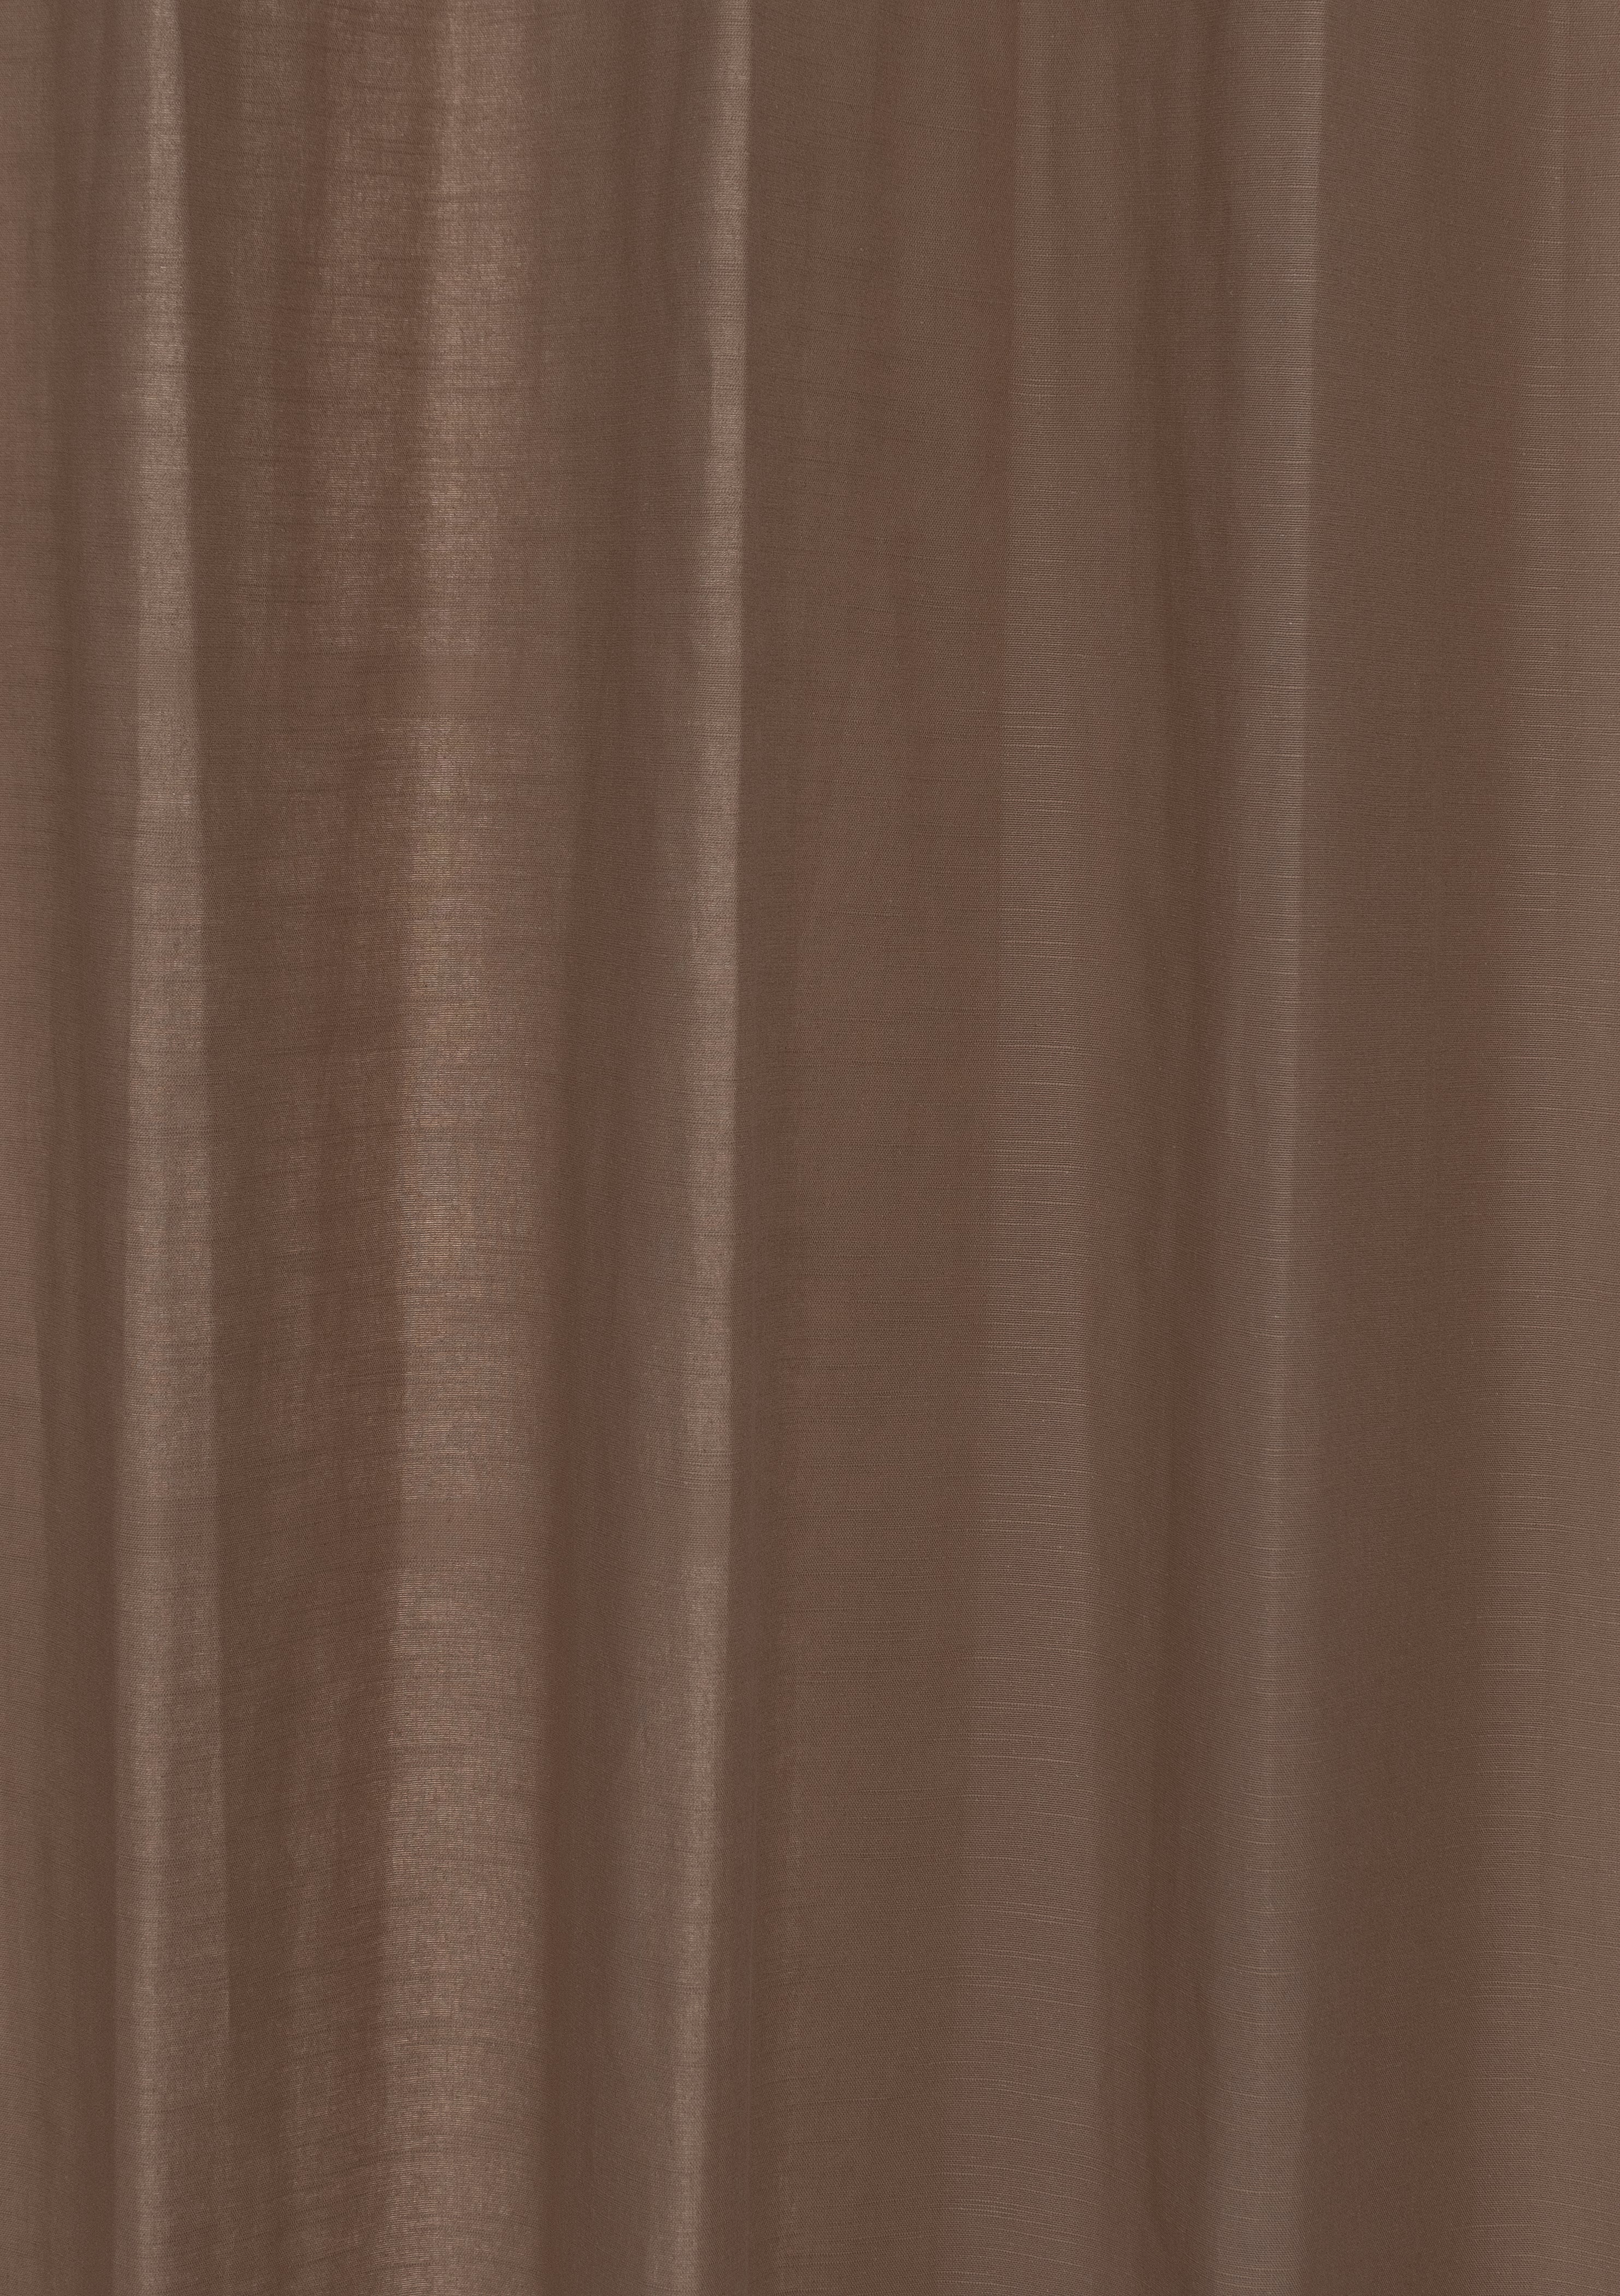 Solid chocolate brown 100% cotton plain fabric for bedroom - Room darkening